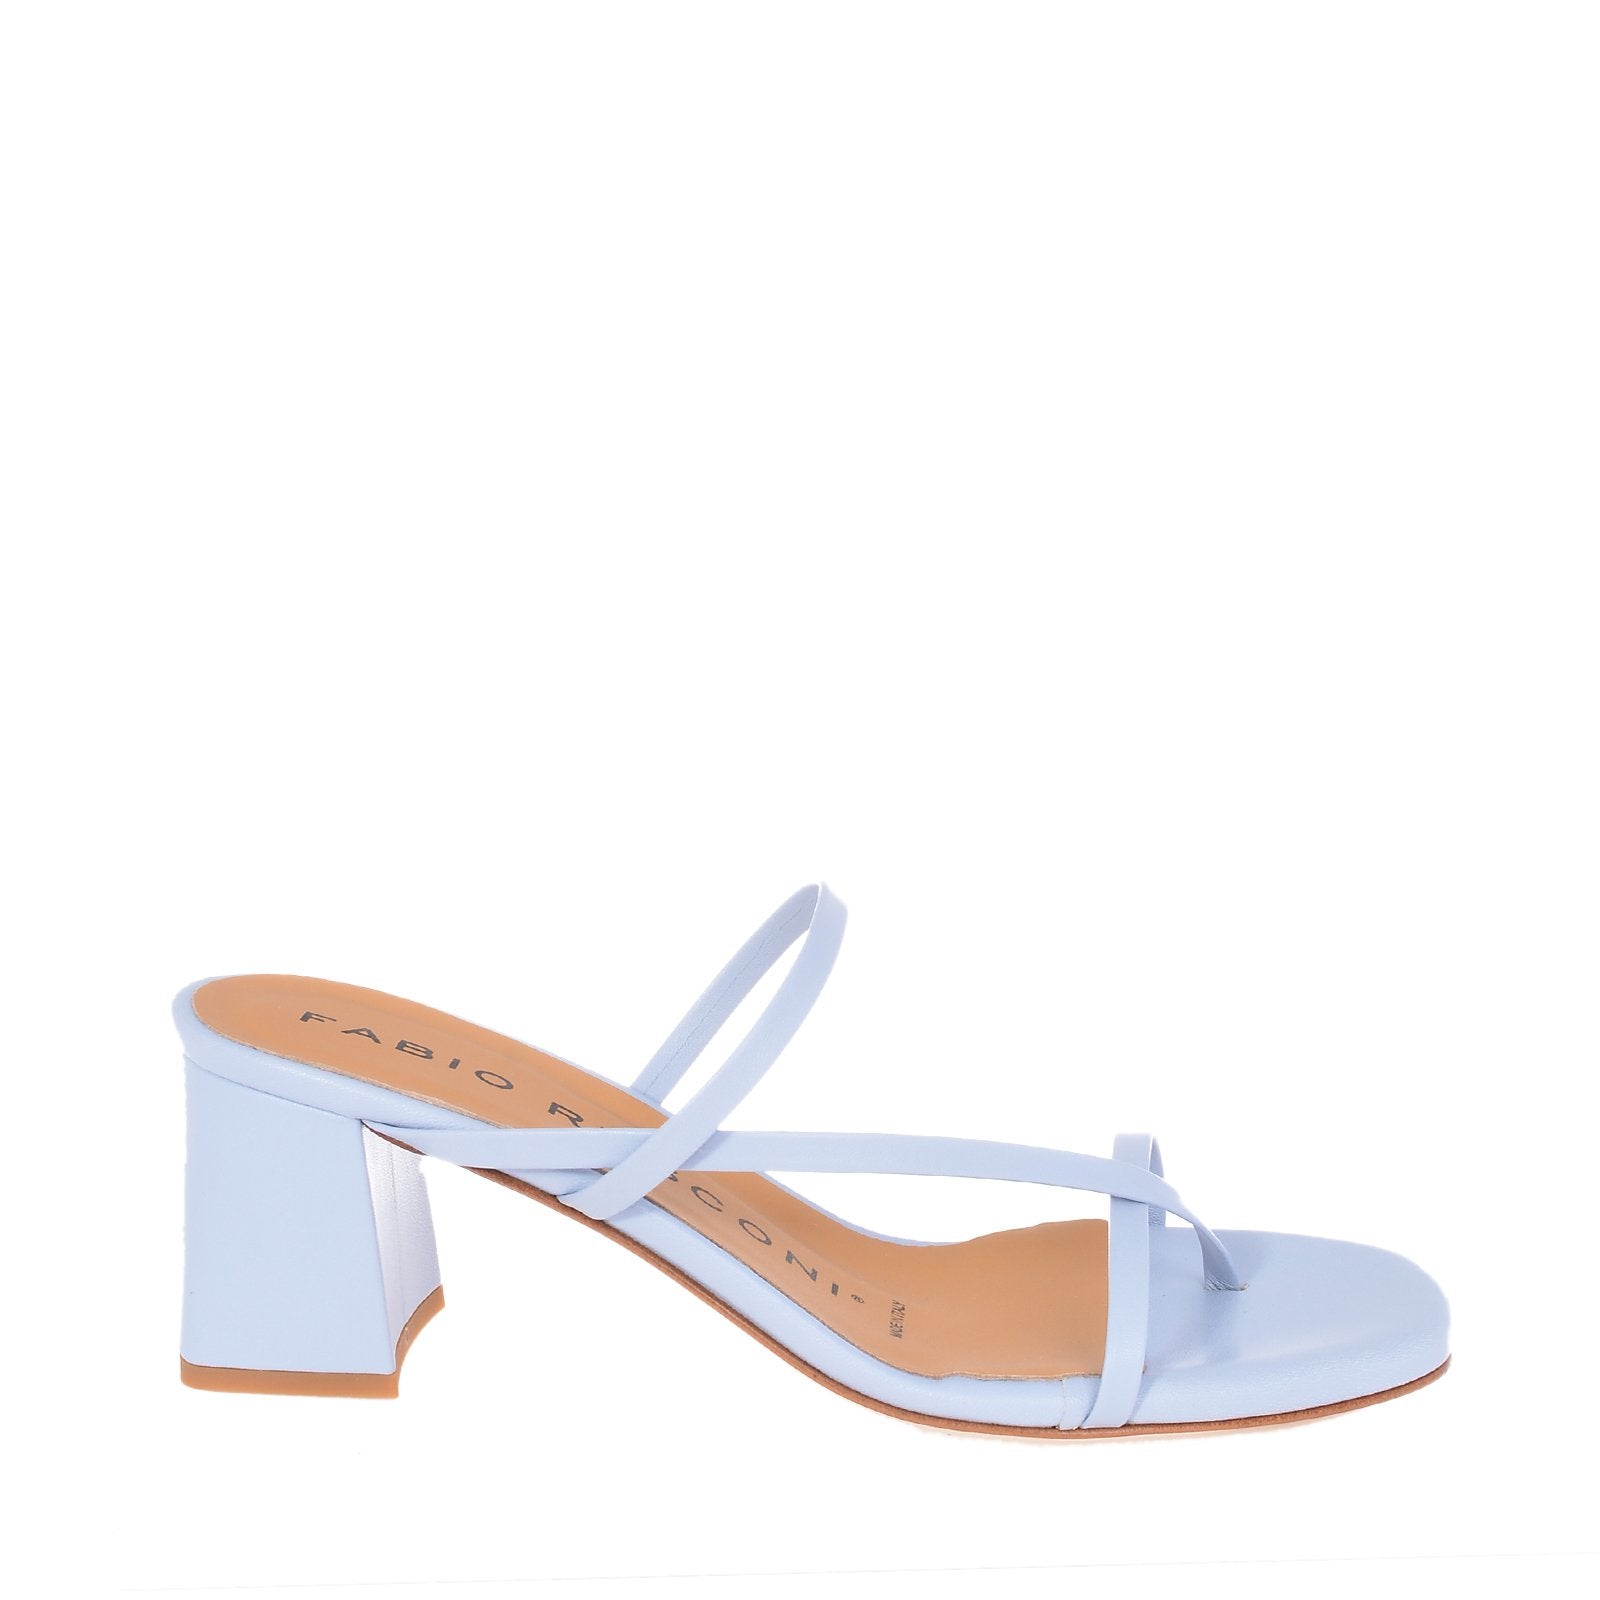 Nature Sky Blue Leather Sandals NUVOLA6983 - 1